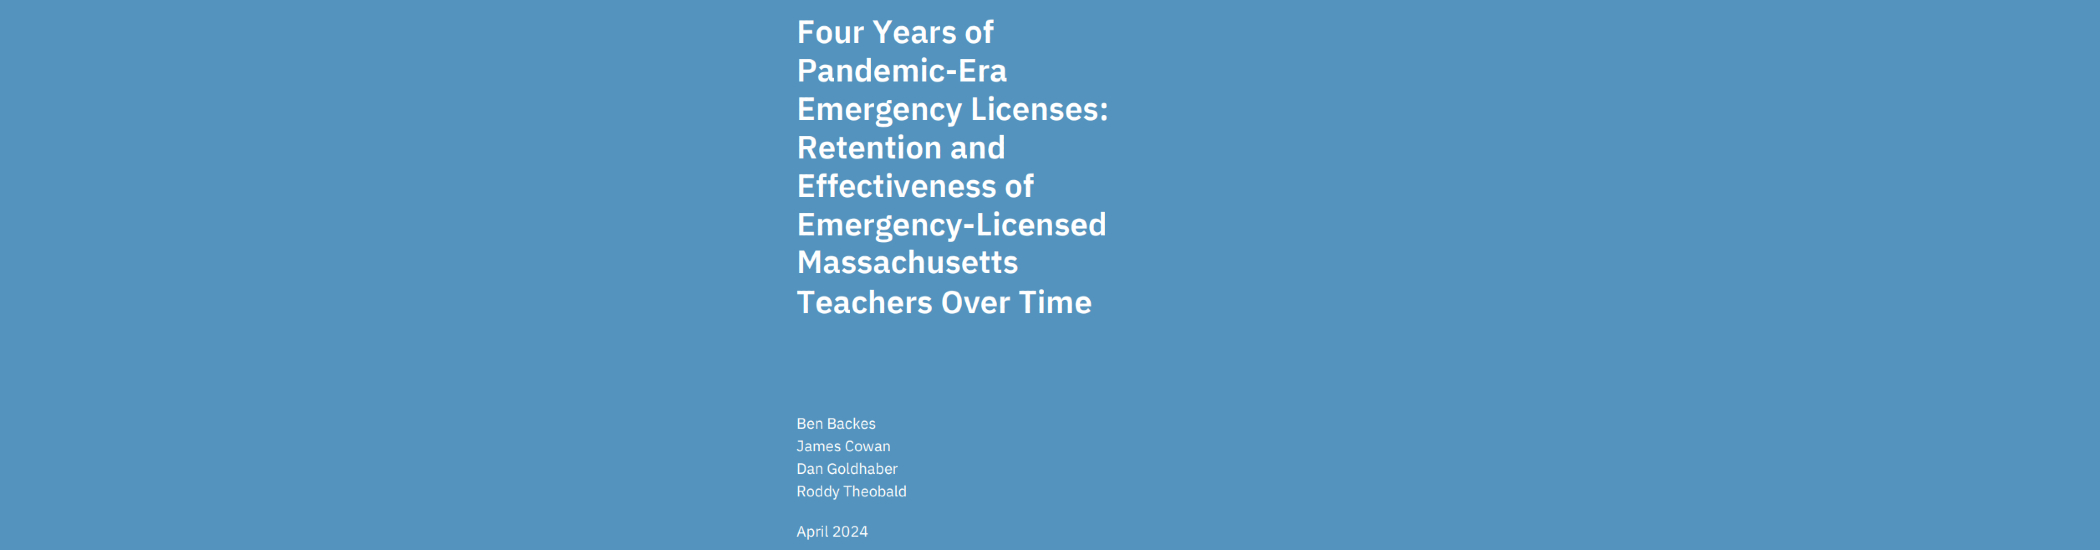 Four Years of Pandemic-Era Emergency Licenses: Retention and Effectiveness of Emergency-Licensed Massachusetts Teachers Over Time